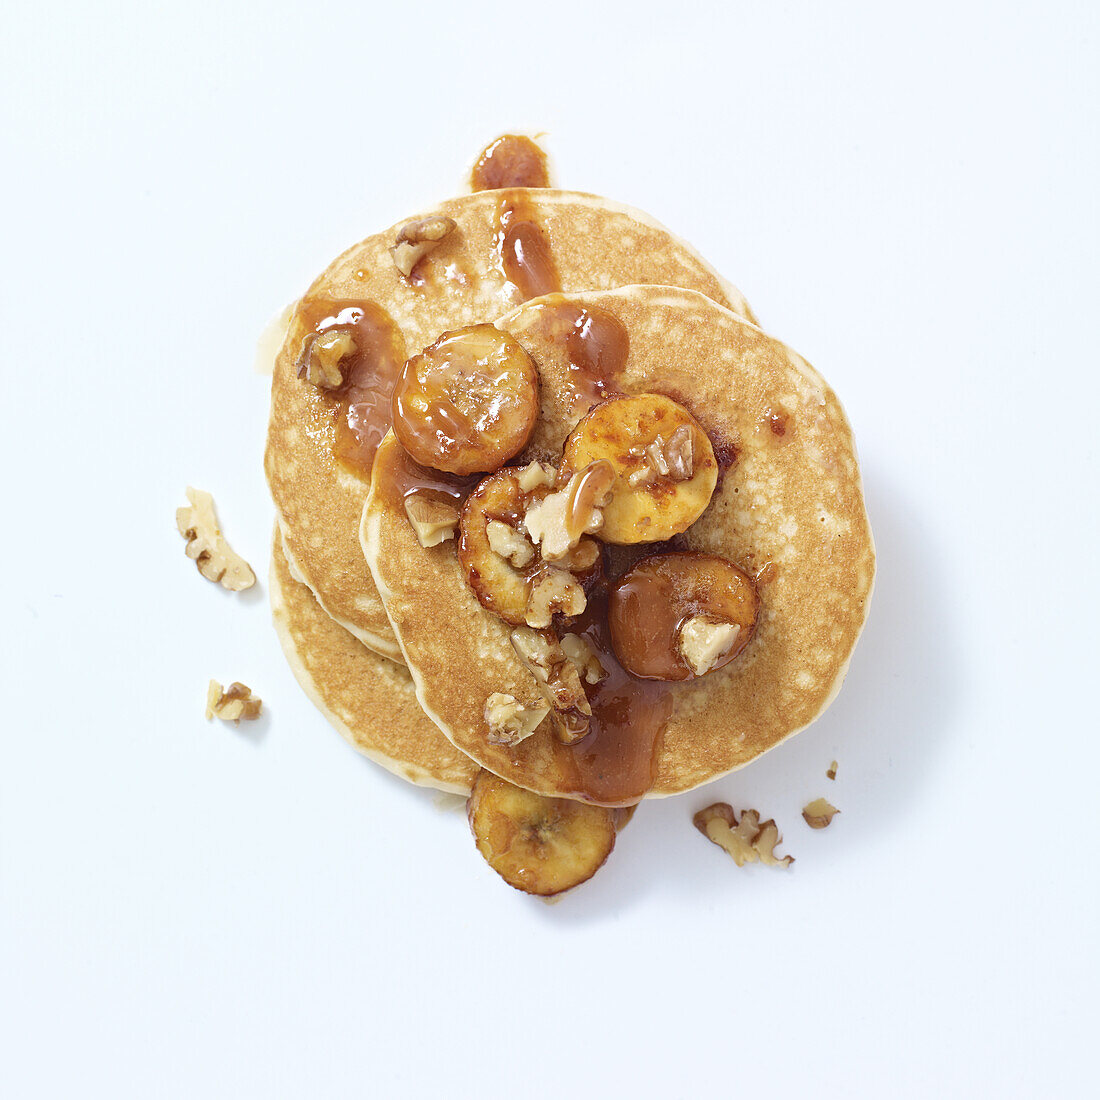 Pancakes topped with caramel, banana and walnuts